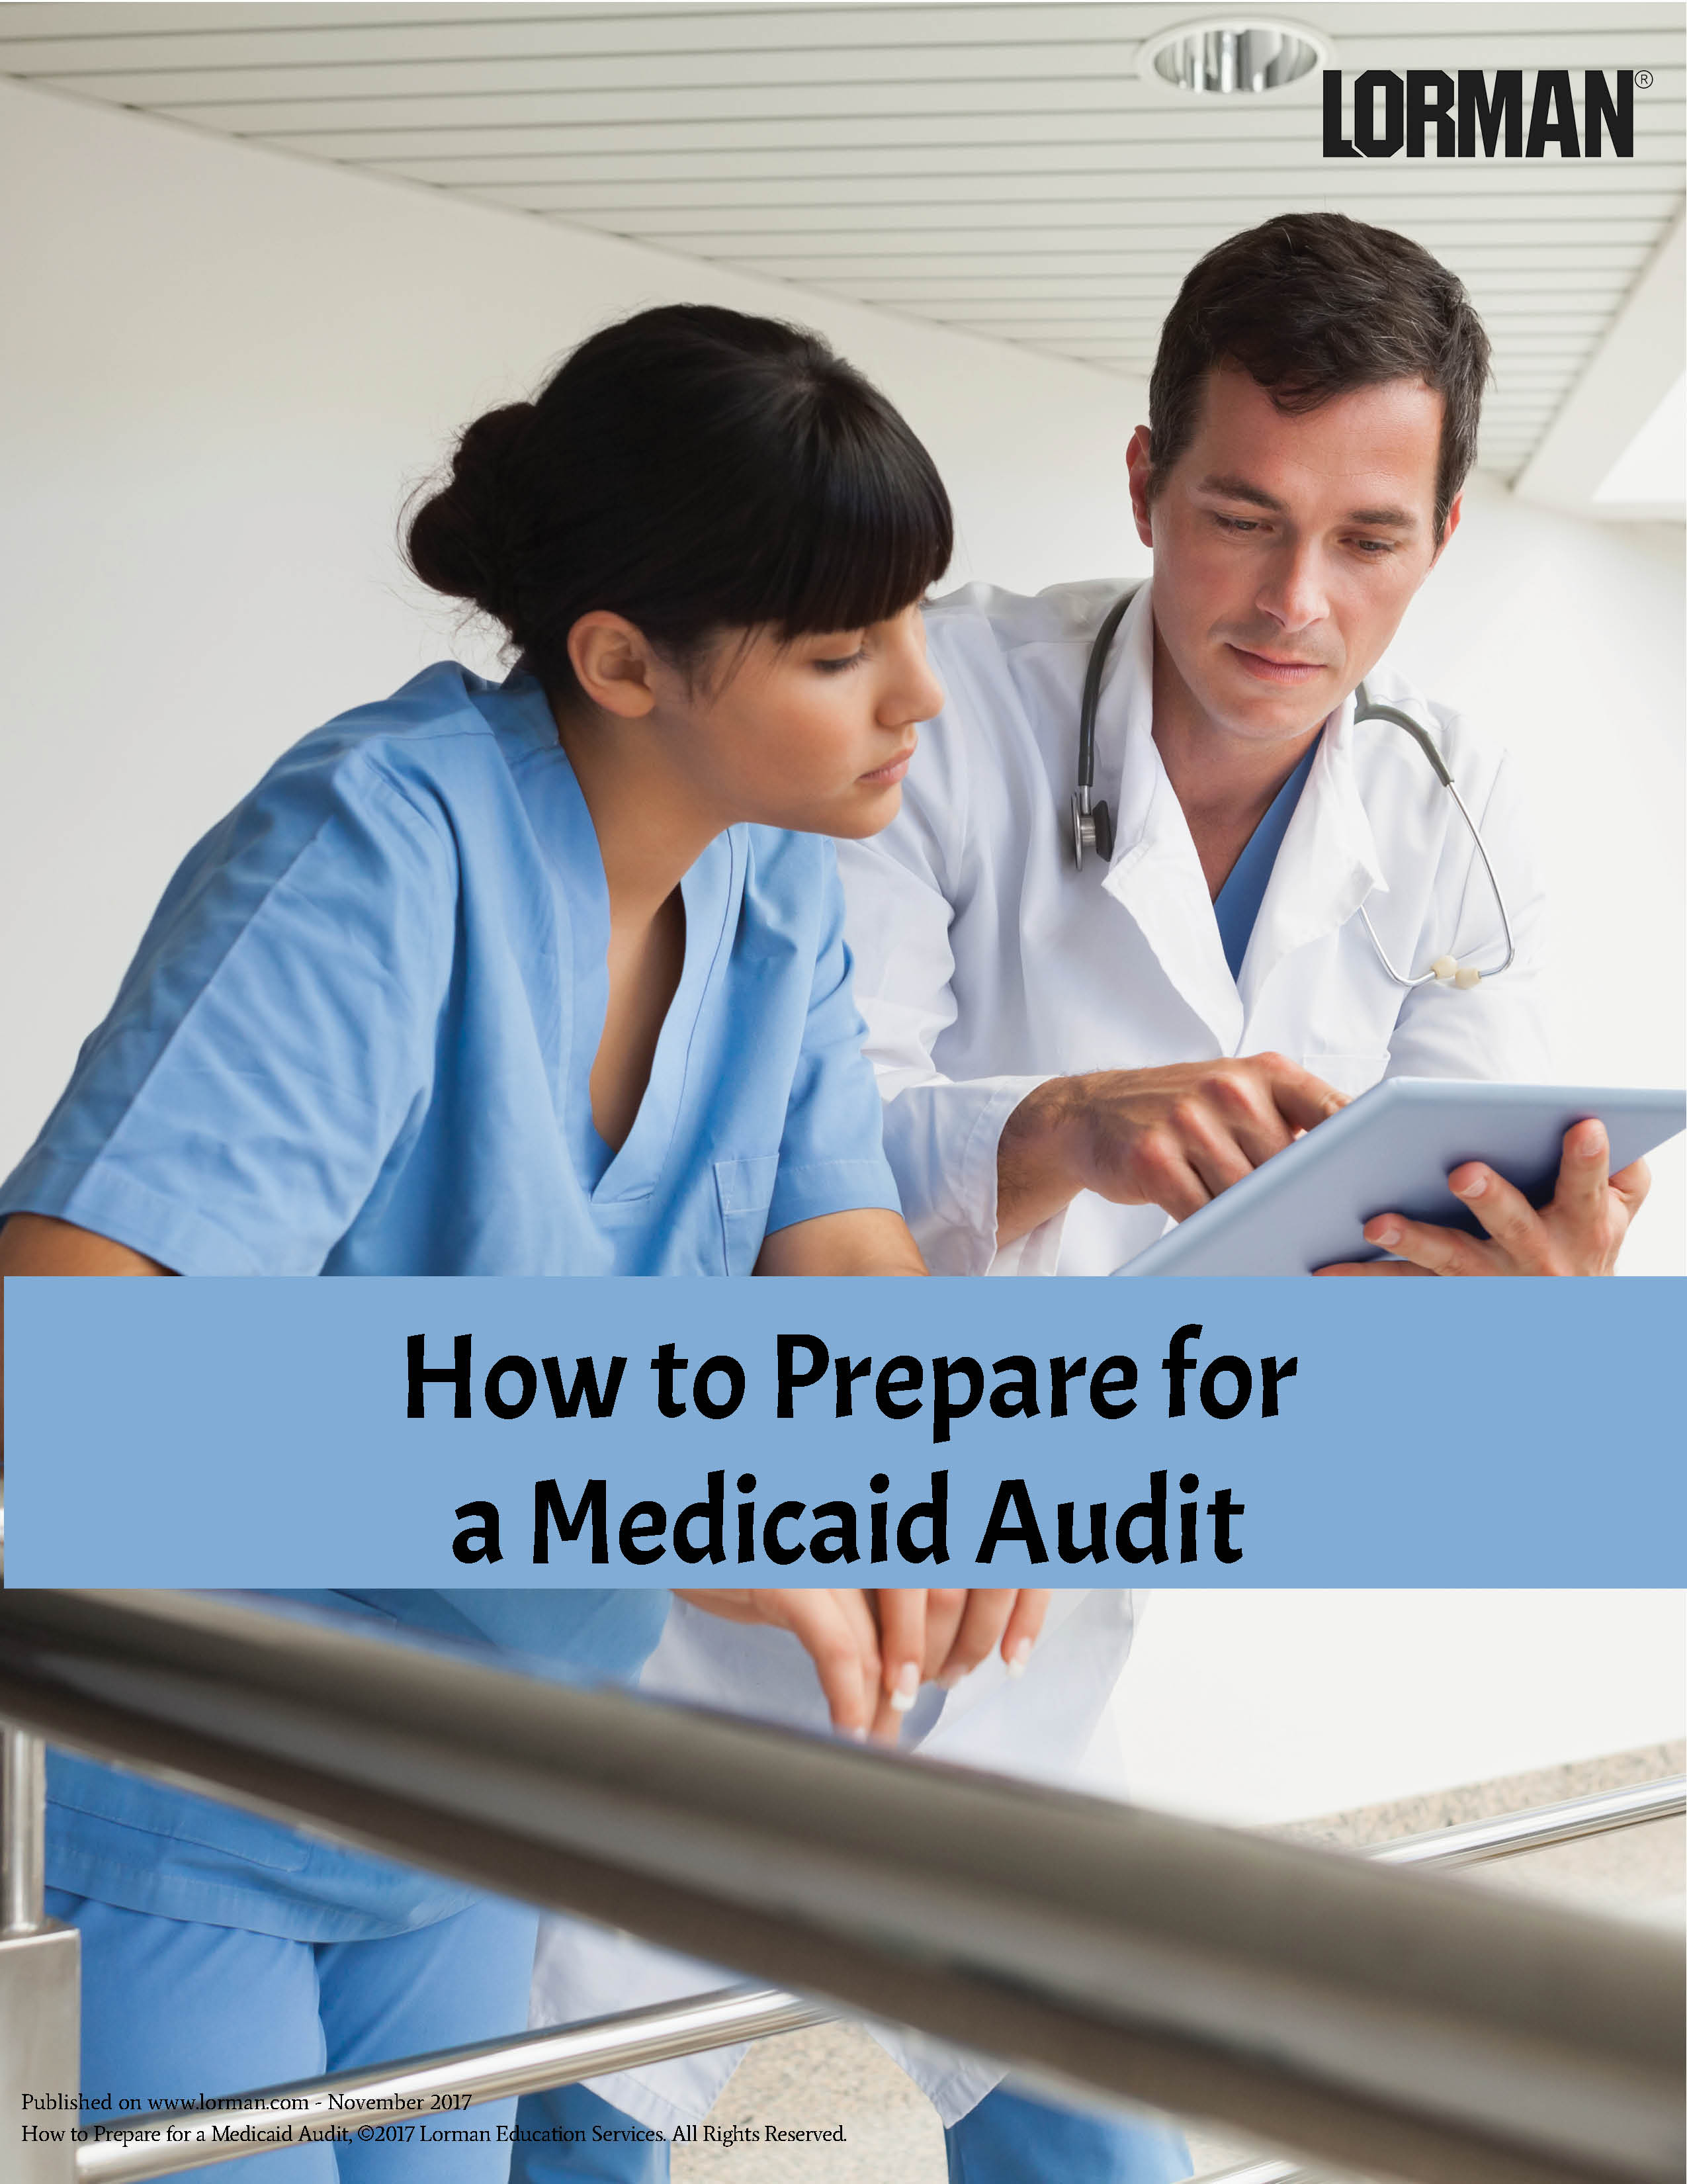 How to Prepare for a Medicaid Audit